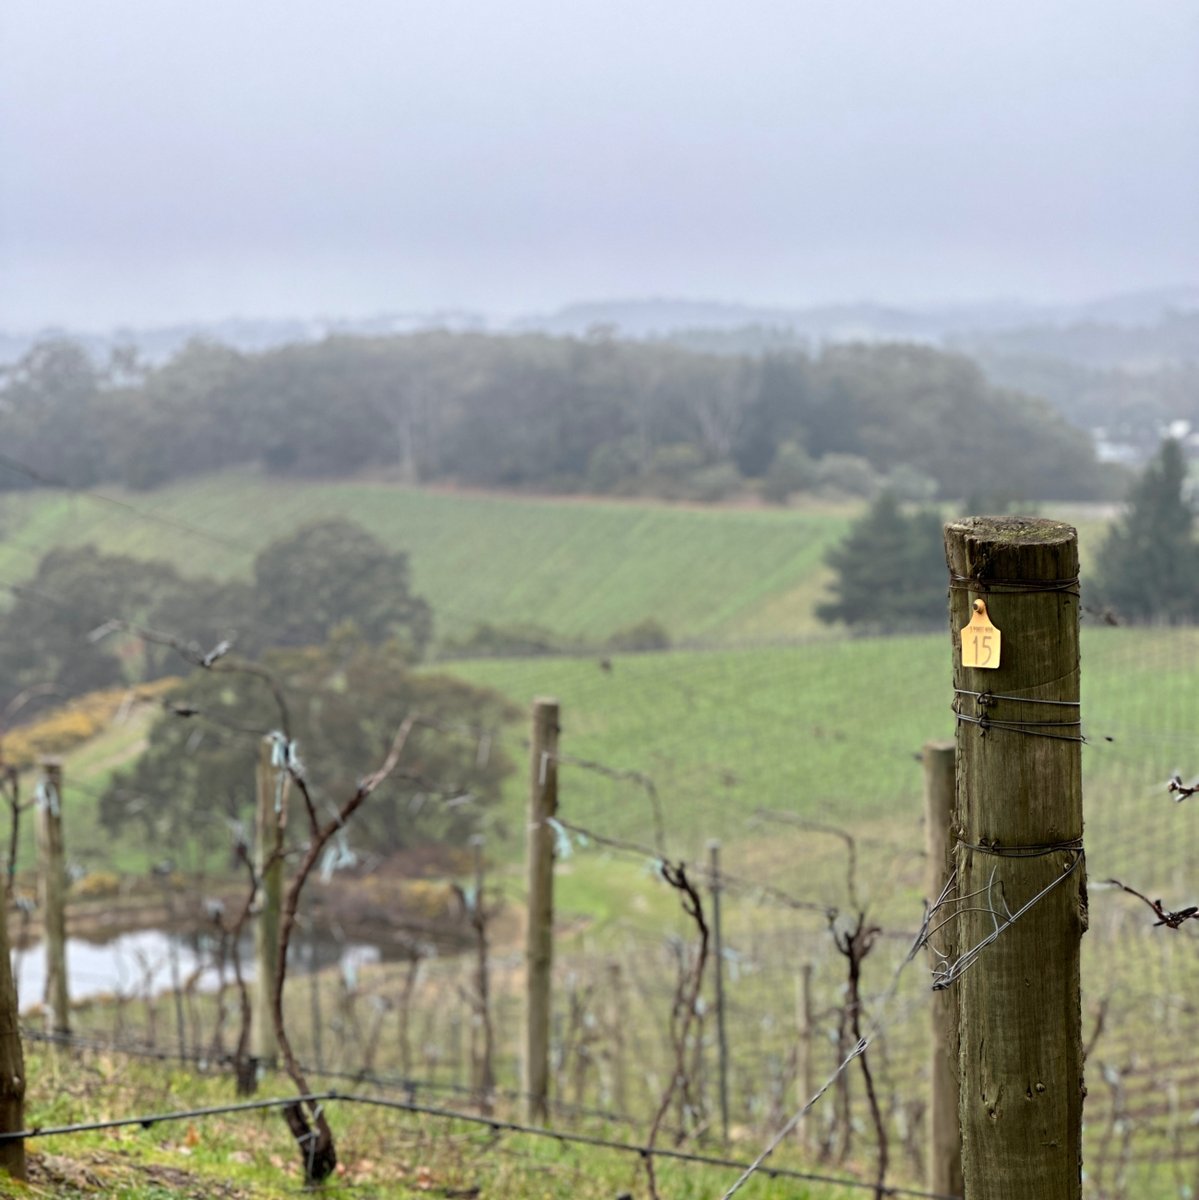 Spring is just around the corner 🙏 but the magical, misty views are still on high rotation, so it looks like we've winter things up here for a while yet! ❄️ #springiscoming #adelaidehills